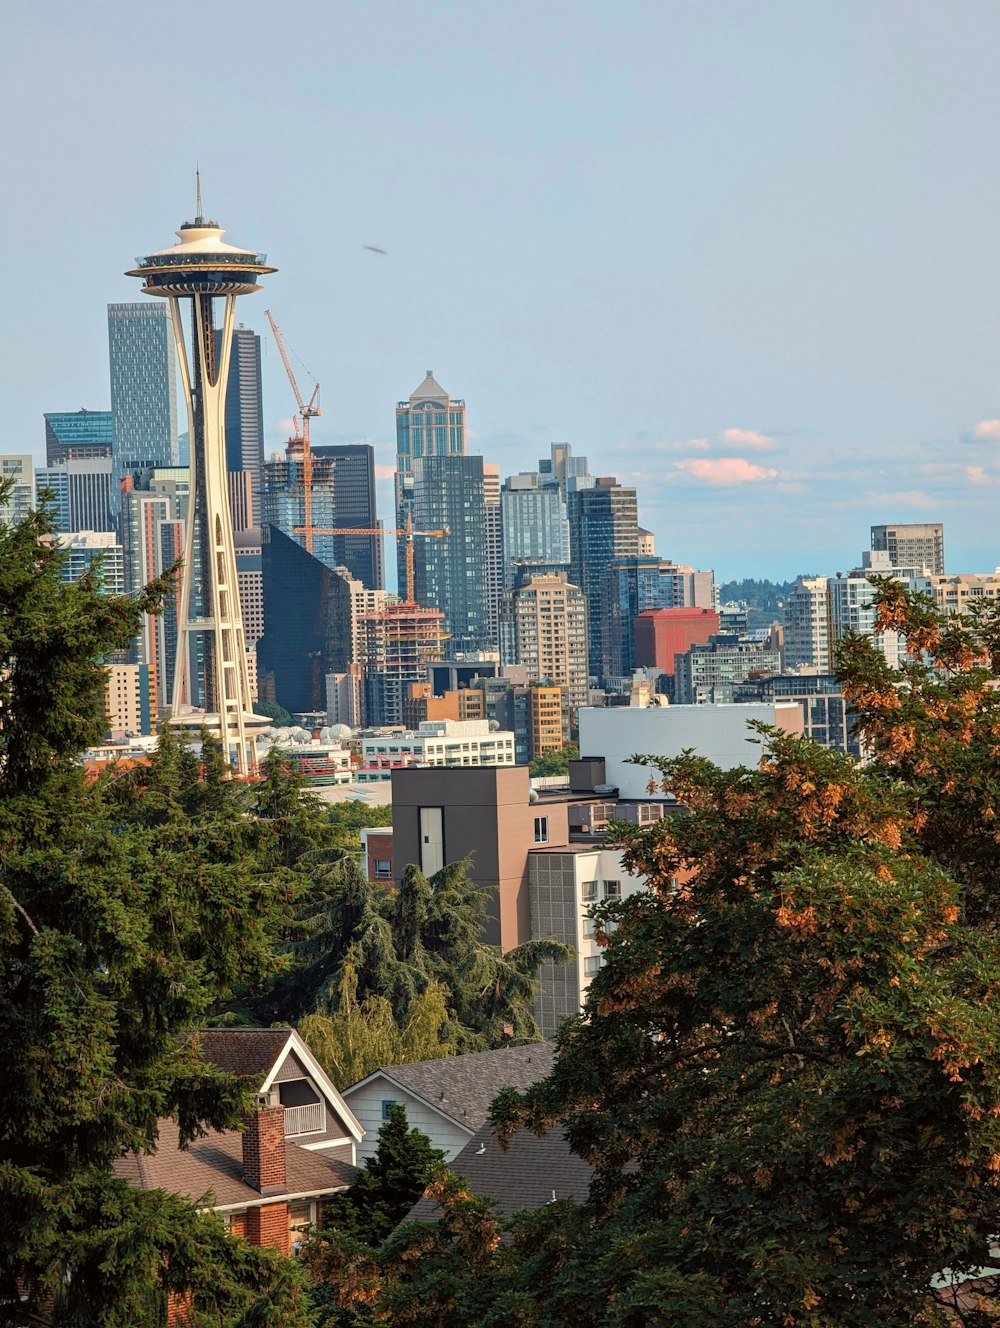 a view of the seattle skyline with the space needle in the foreground